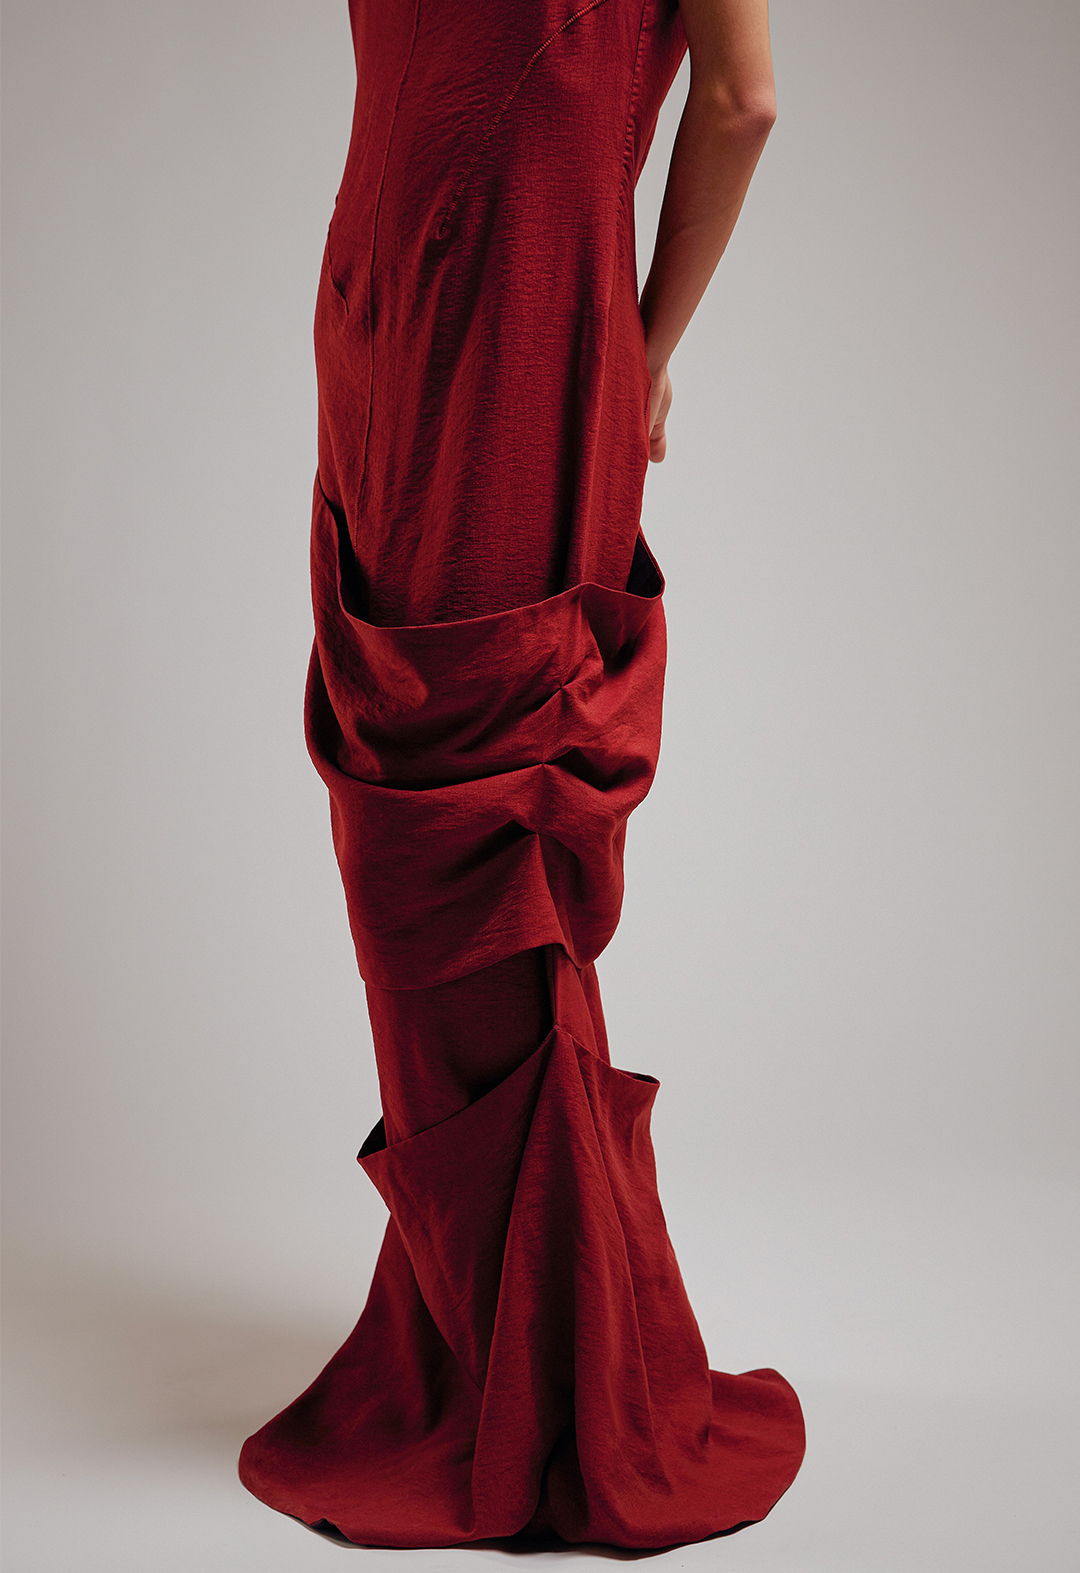 The drapes were created by hand tucking each layer to the dress, creating depth and showing the inside lining.